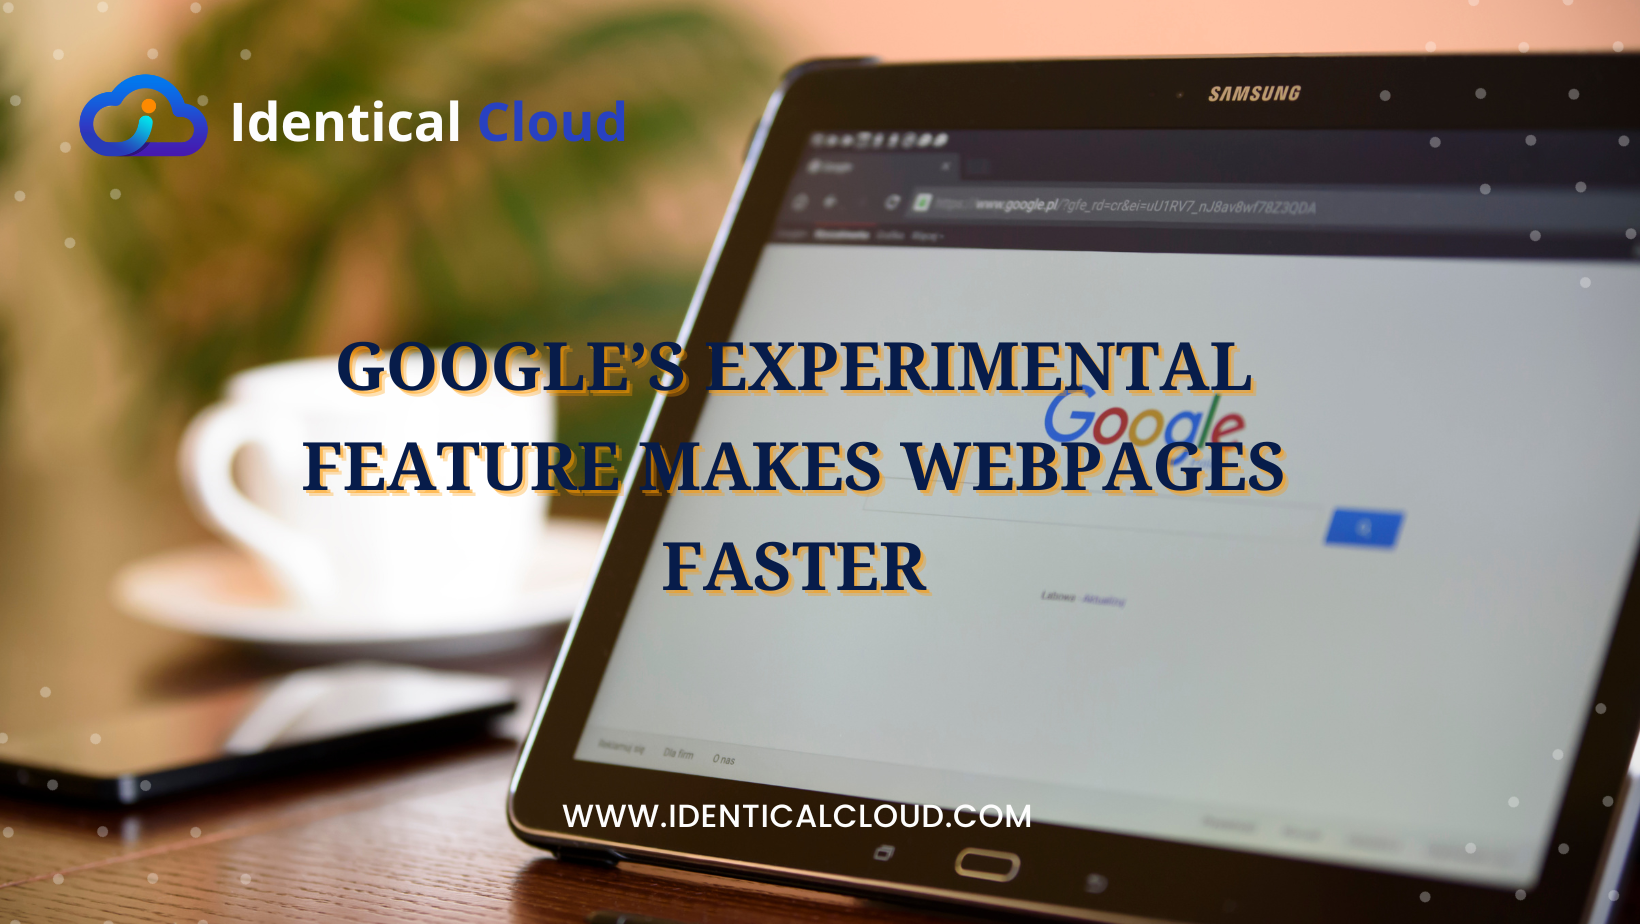 Google’s Experimental Feature Makes Webpages Faster - identicalcloud.com